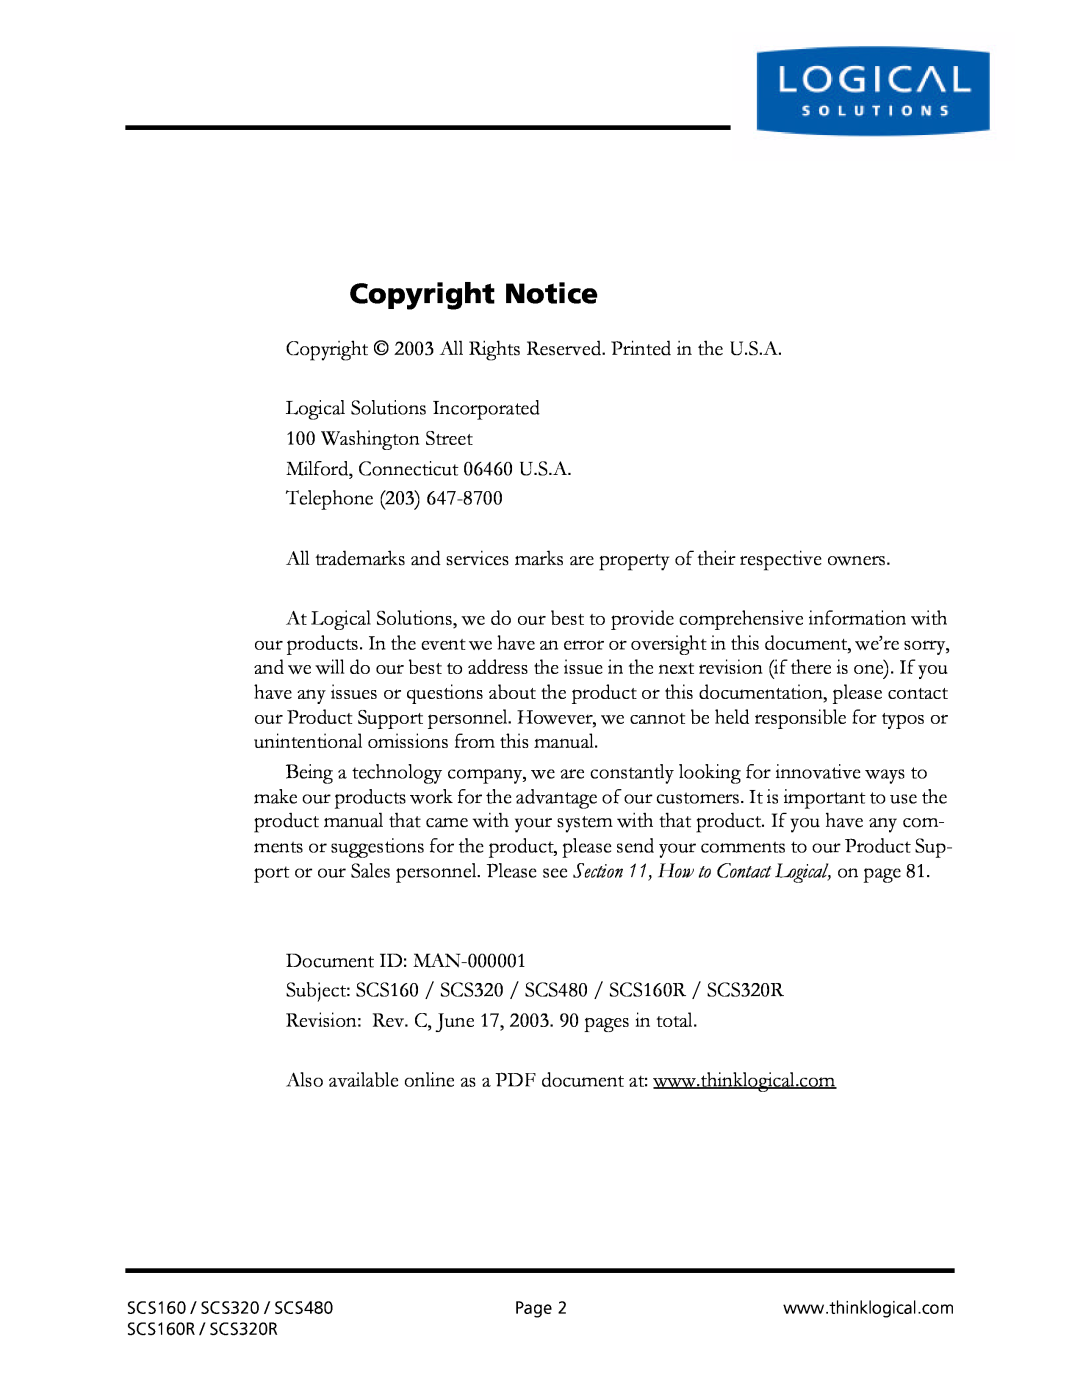 Logical Solutions SCS-R manual Copyright Notice 